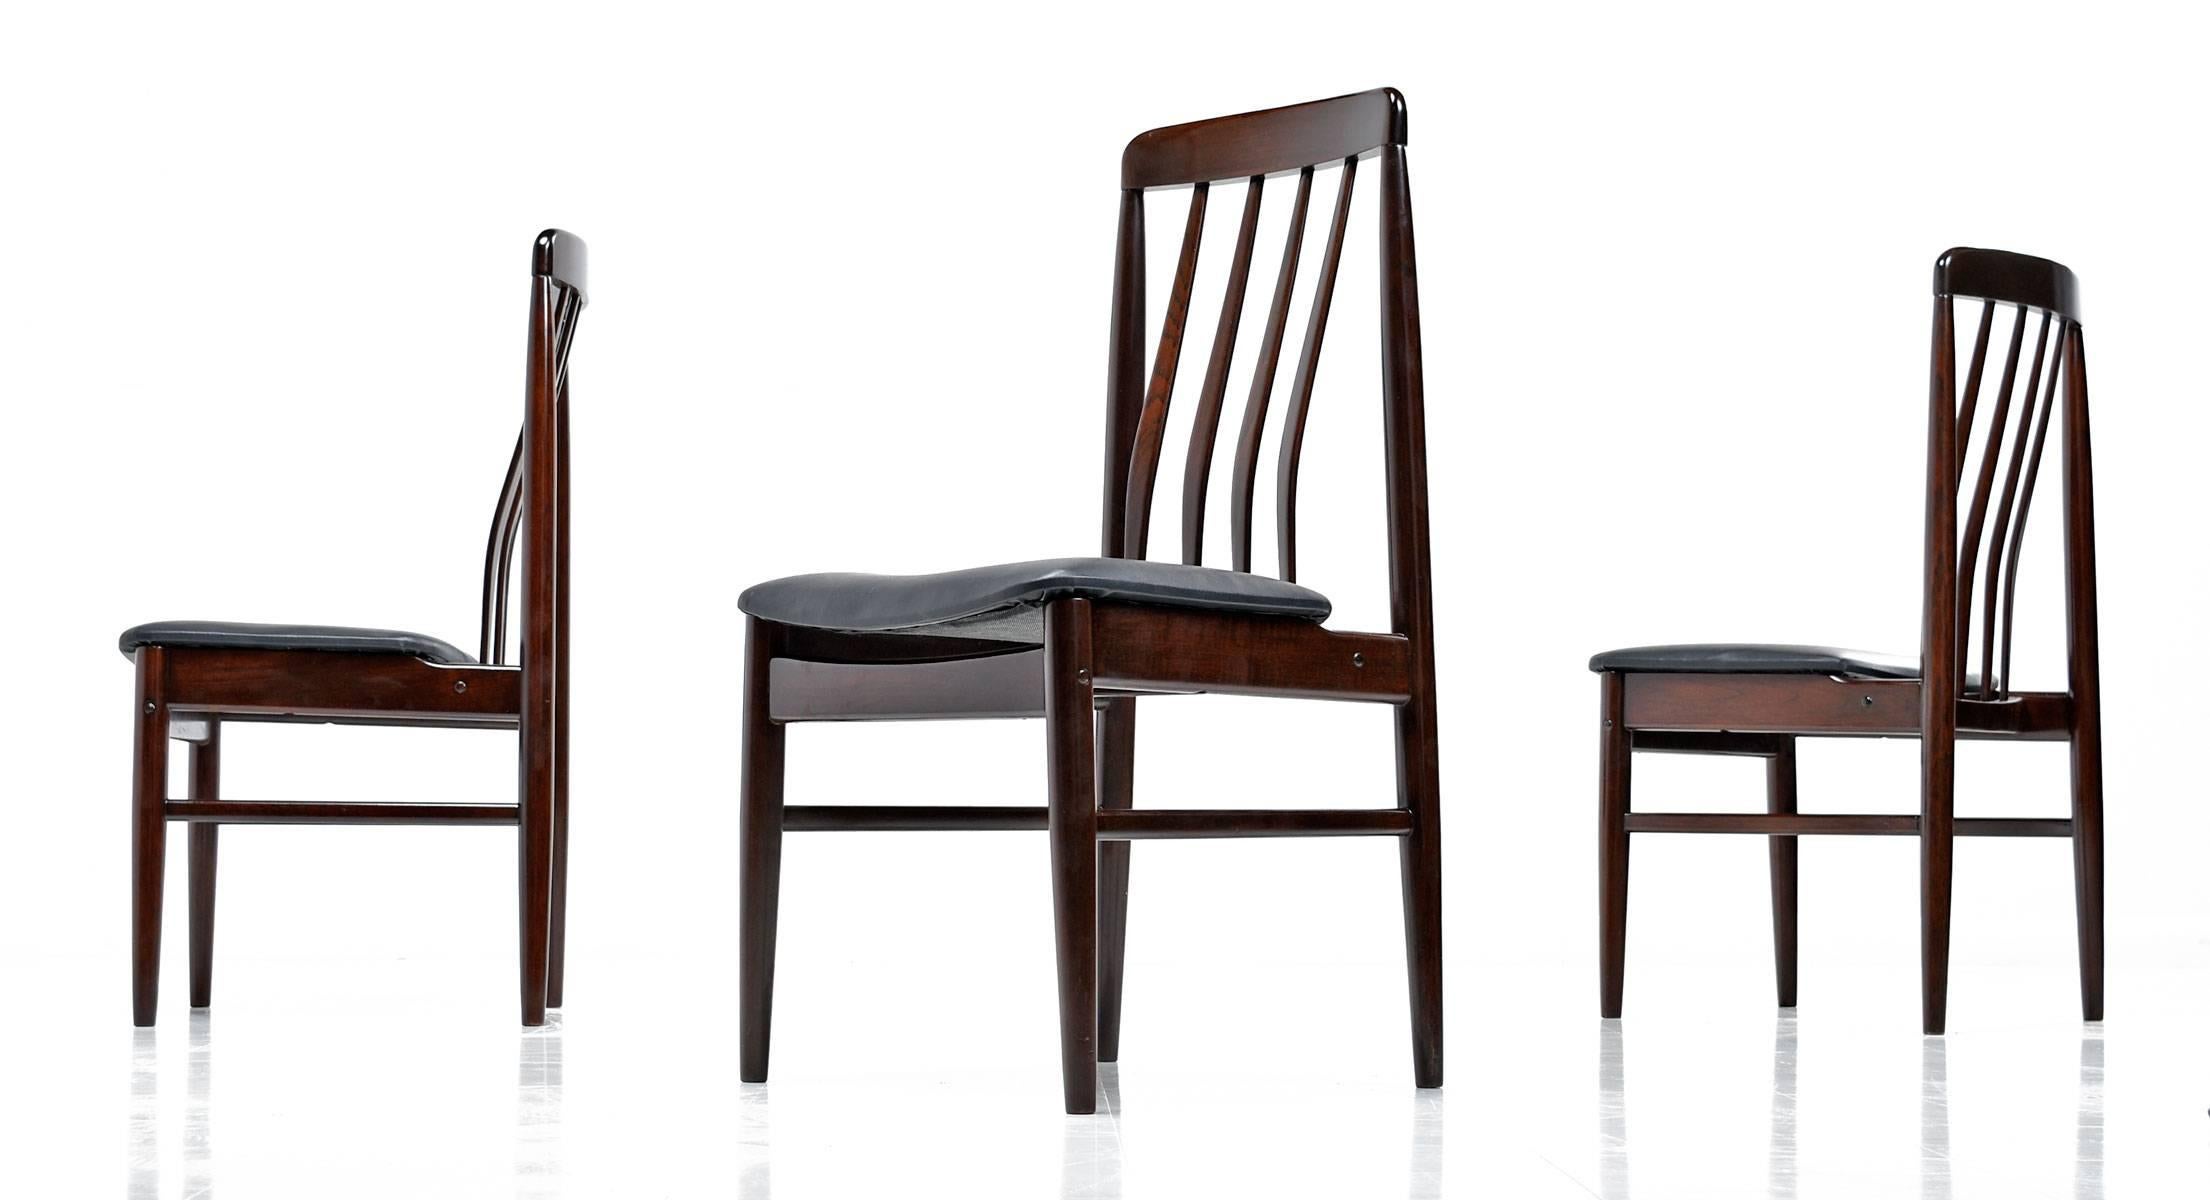 Outstanding set of four Danish Modern rosewood dining chairs. One does not have to sacrifice comfort for style. These chairs embrace your back with their contoured, ergonomic design. The chairs have been restored with all new high quality black